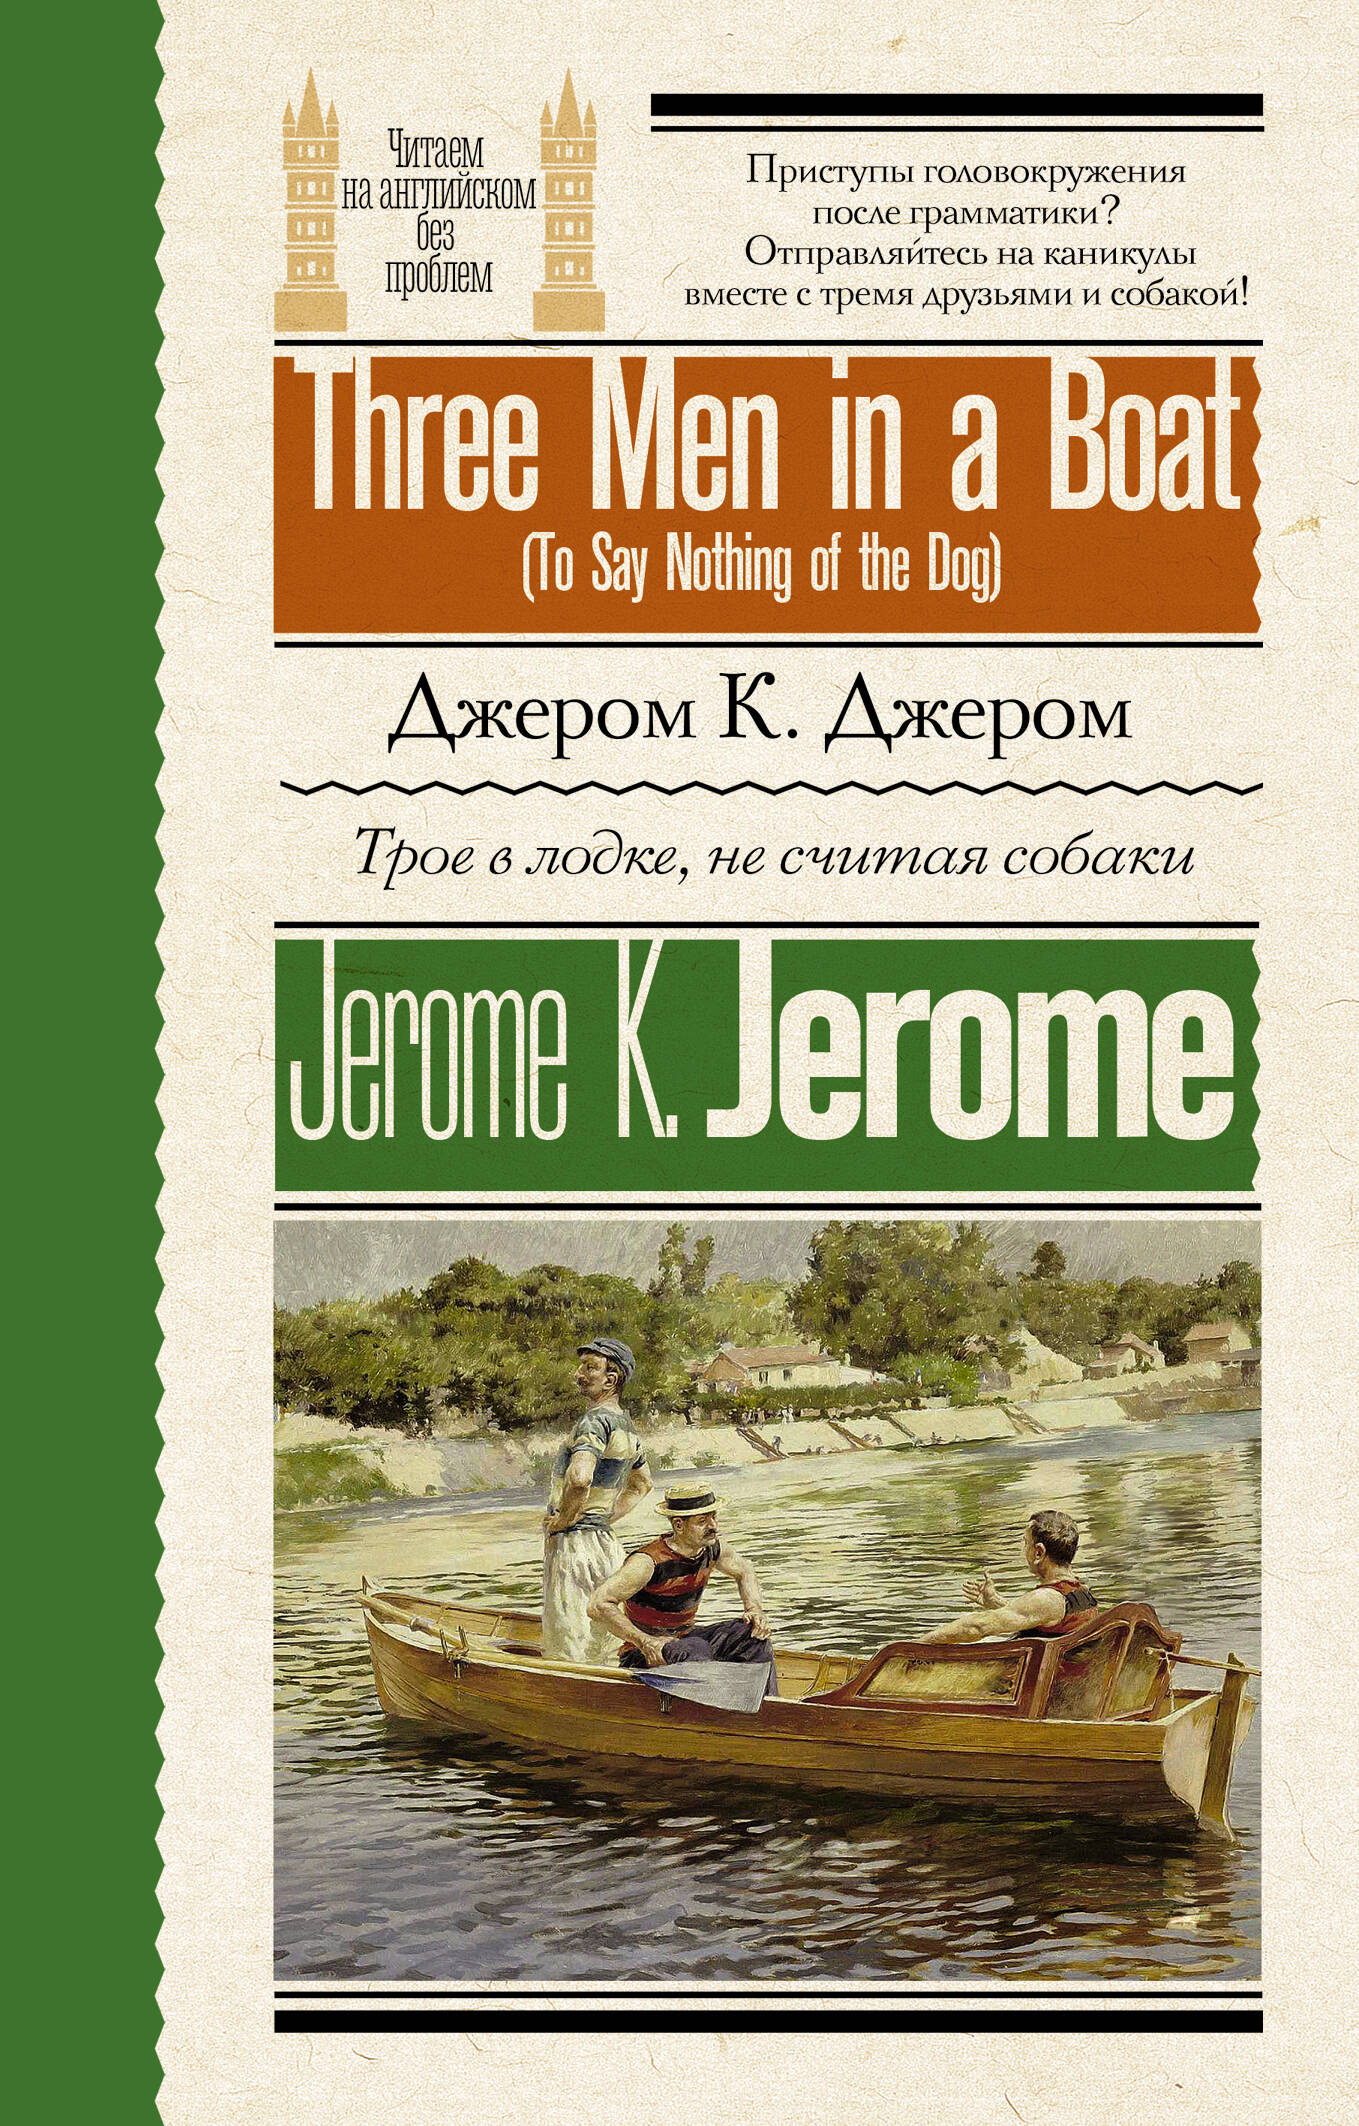   ,    = Three Men in a Boat (To Say Nothing of the Dog)